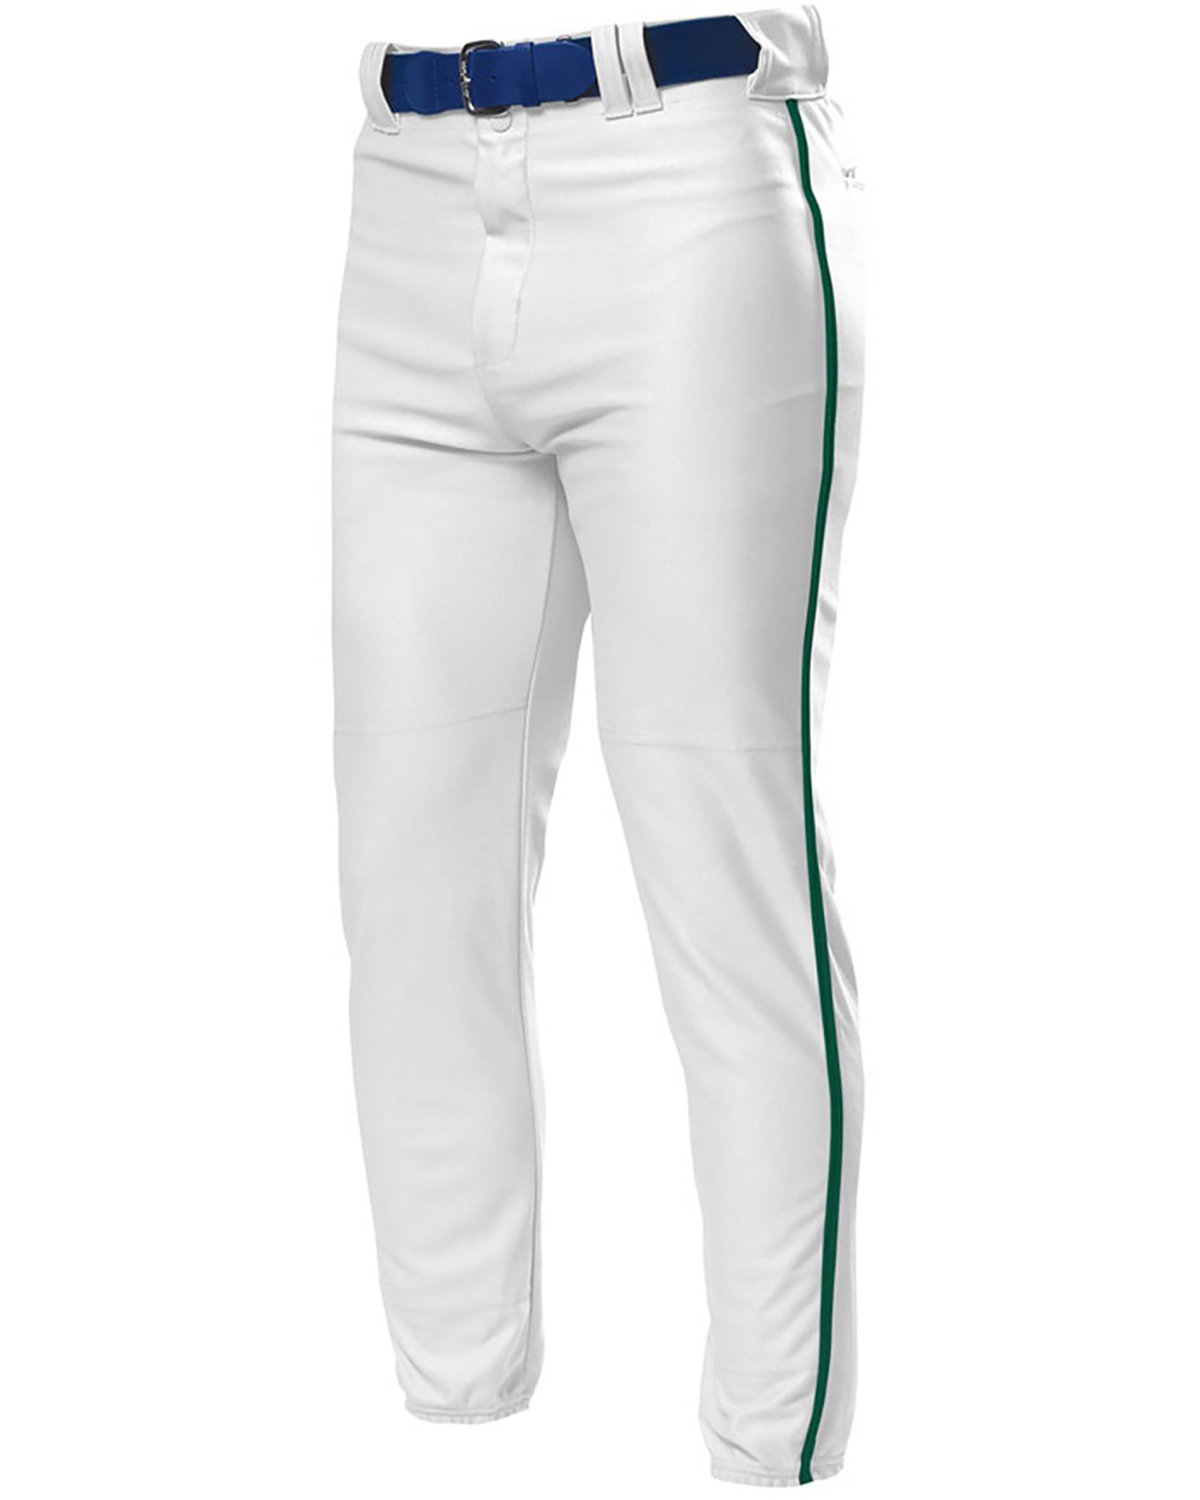 A4 Apparel NB6003 Youth Baseball Knicker Pants - From $18.63